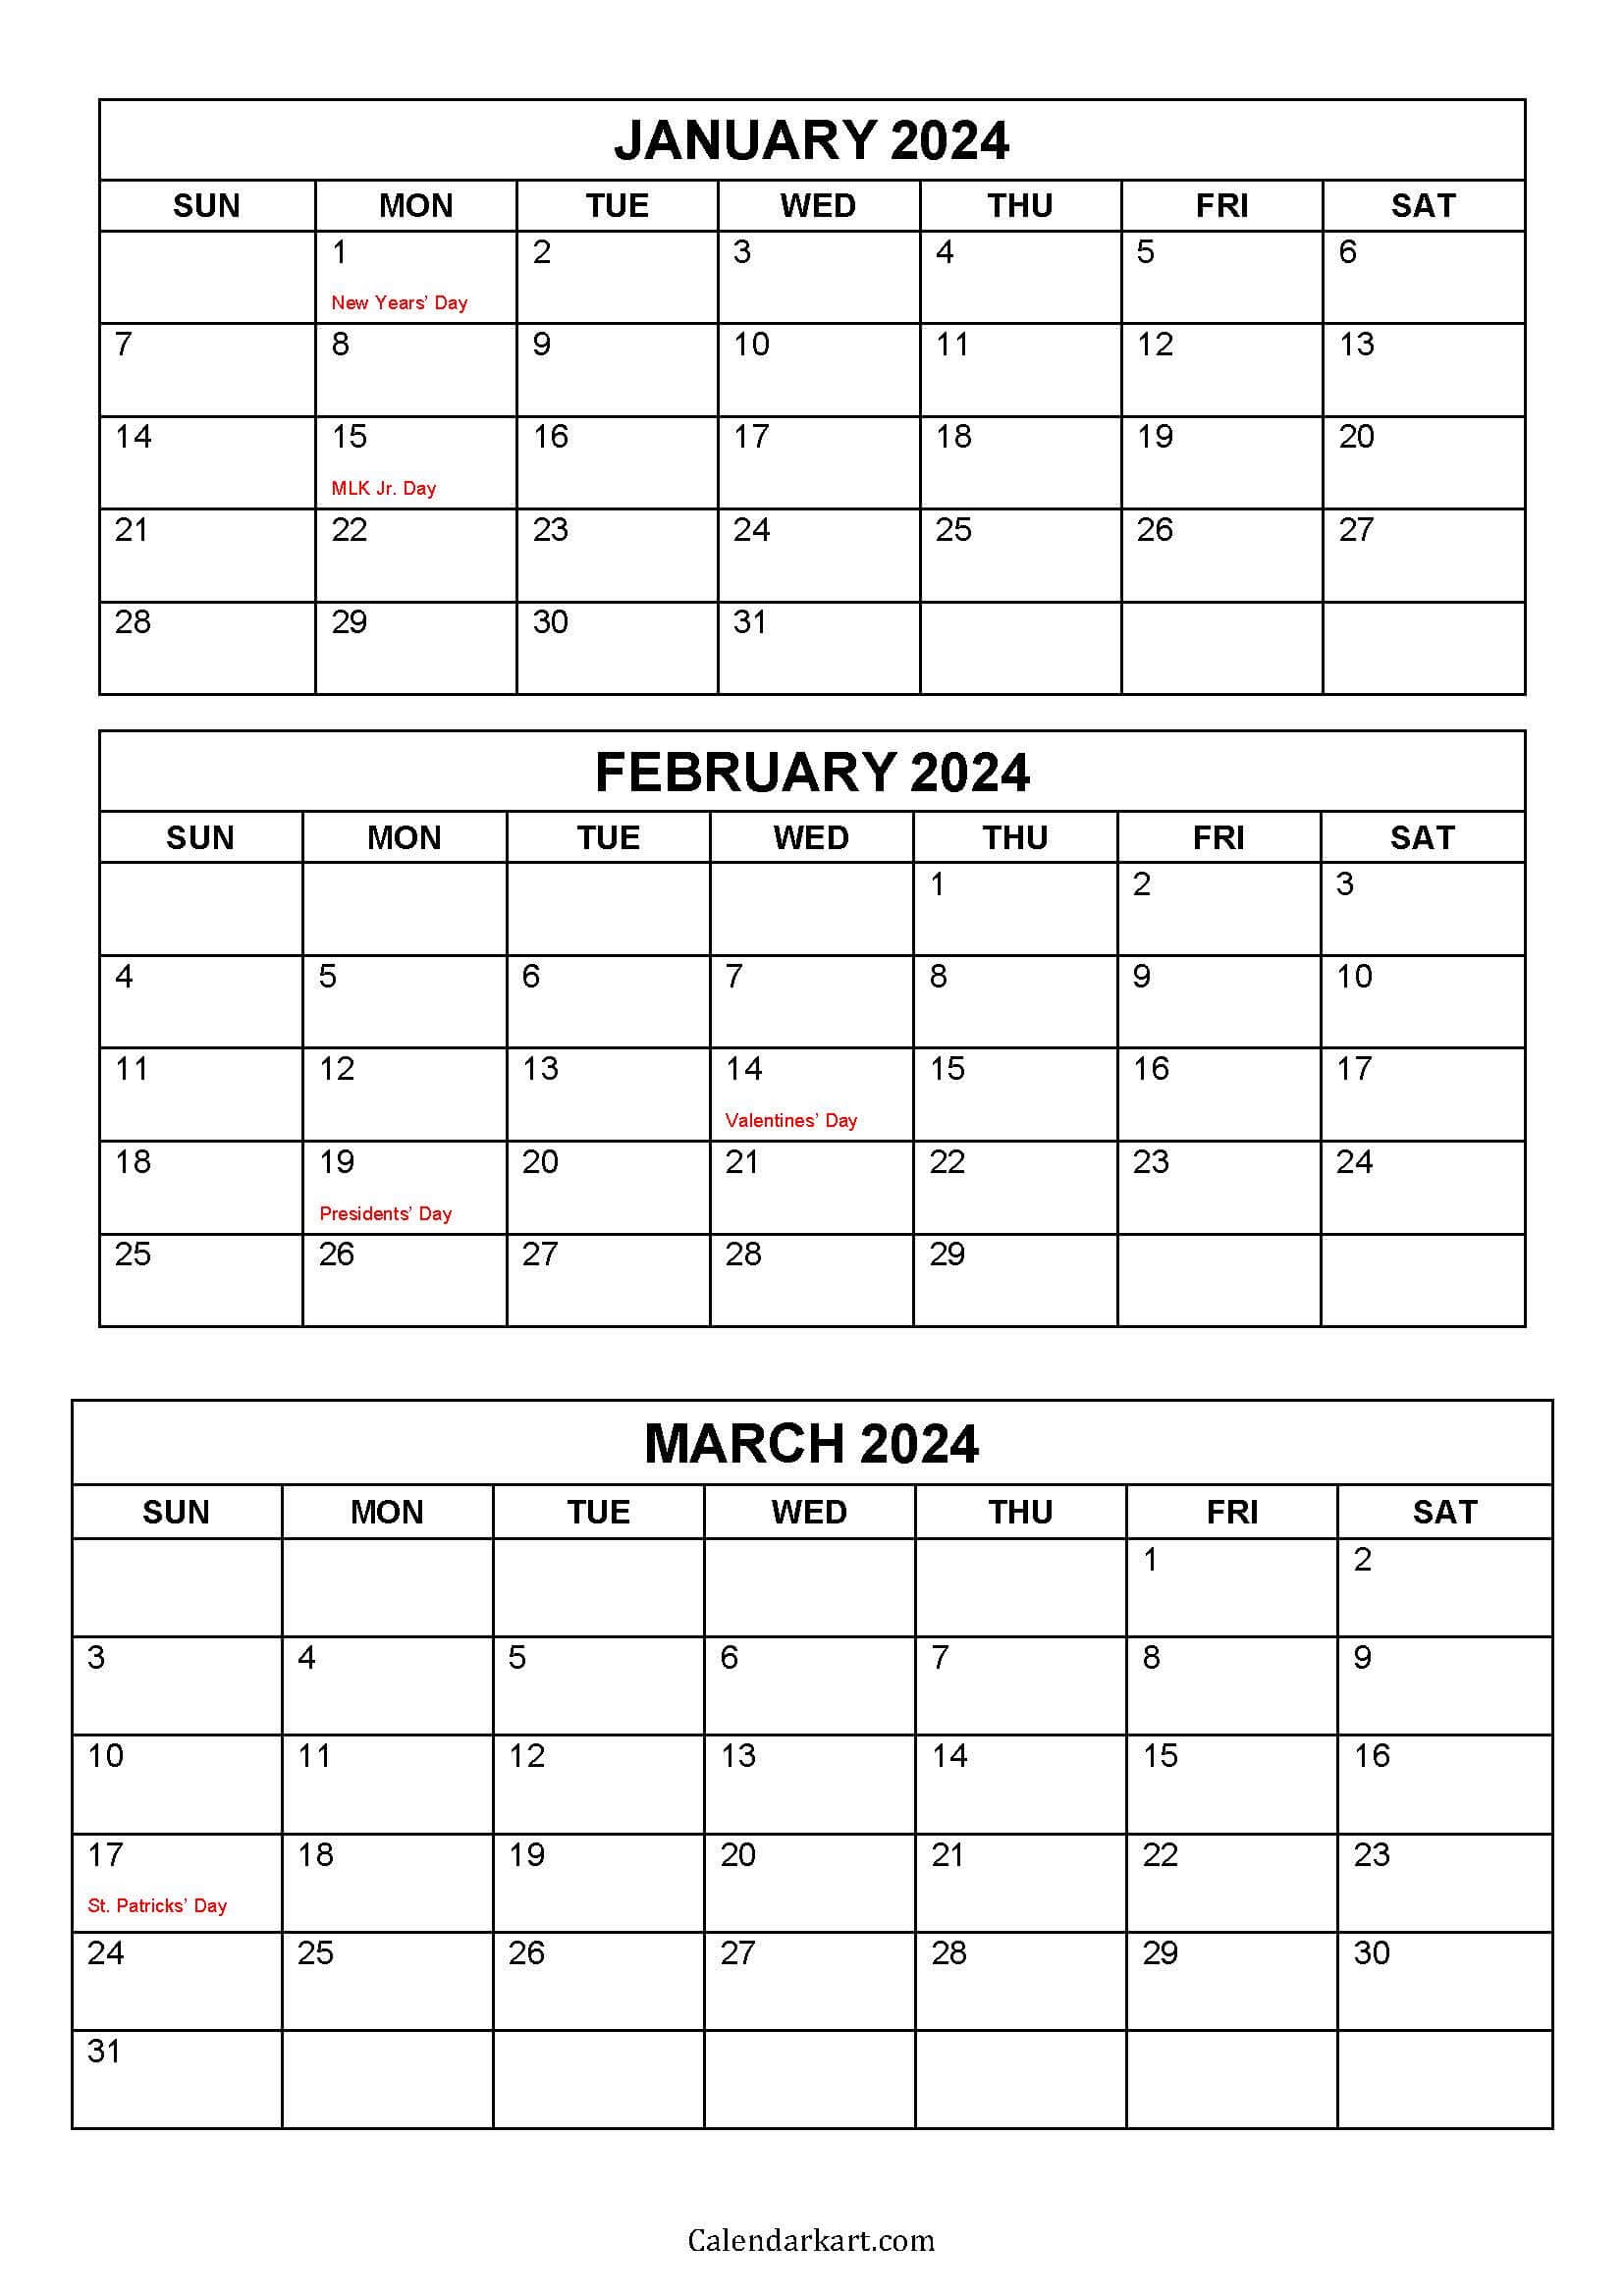 Free Printable January To March 2024 Calendar - Calendarkart inside Free Printable Calendar 2024 4 Month Per Page